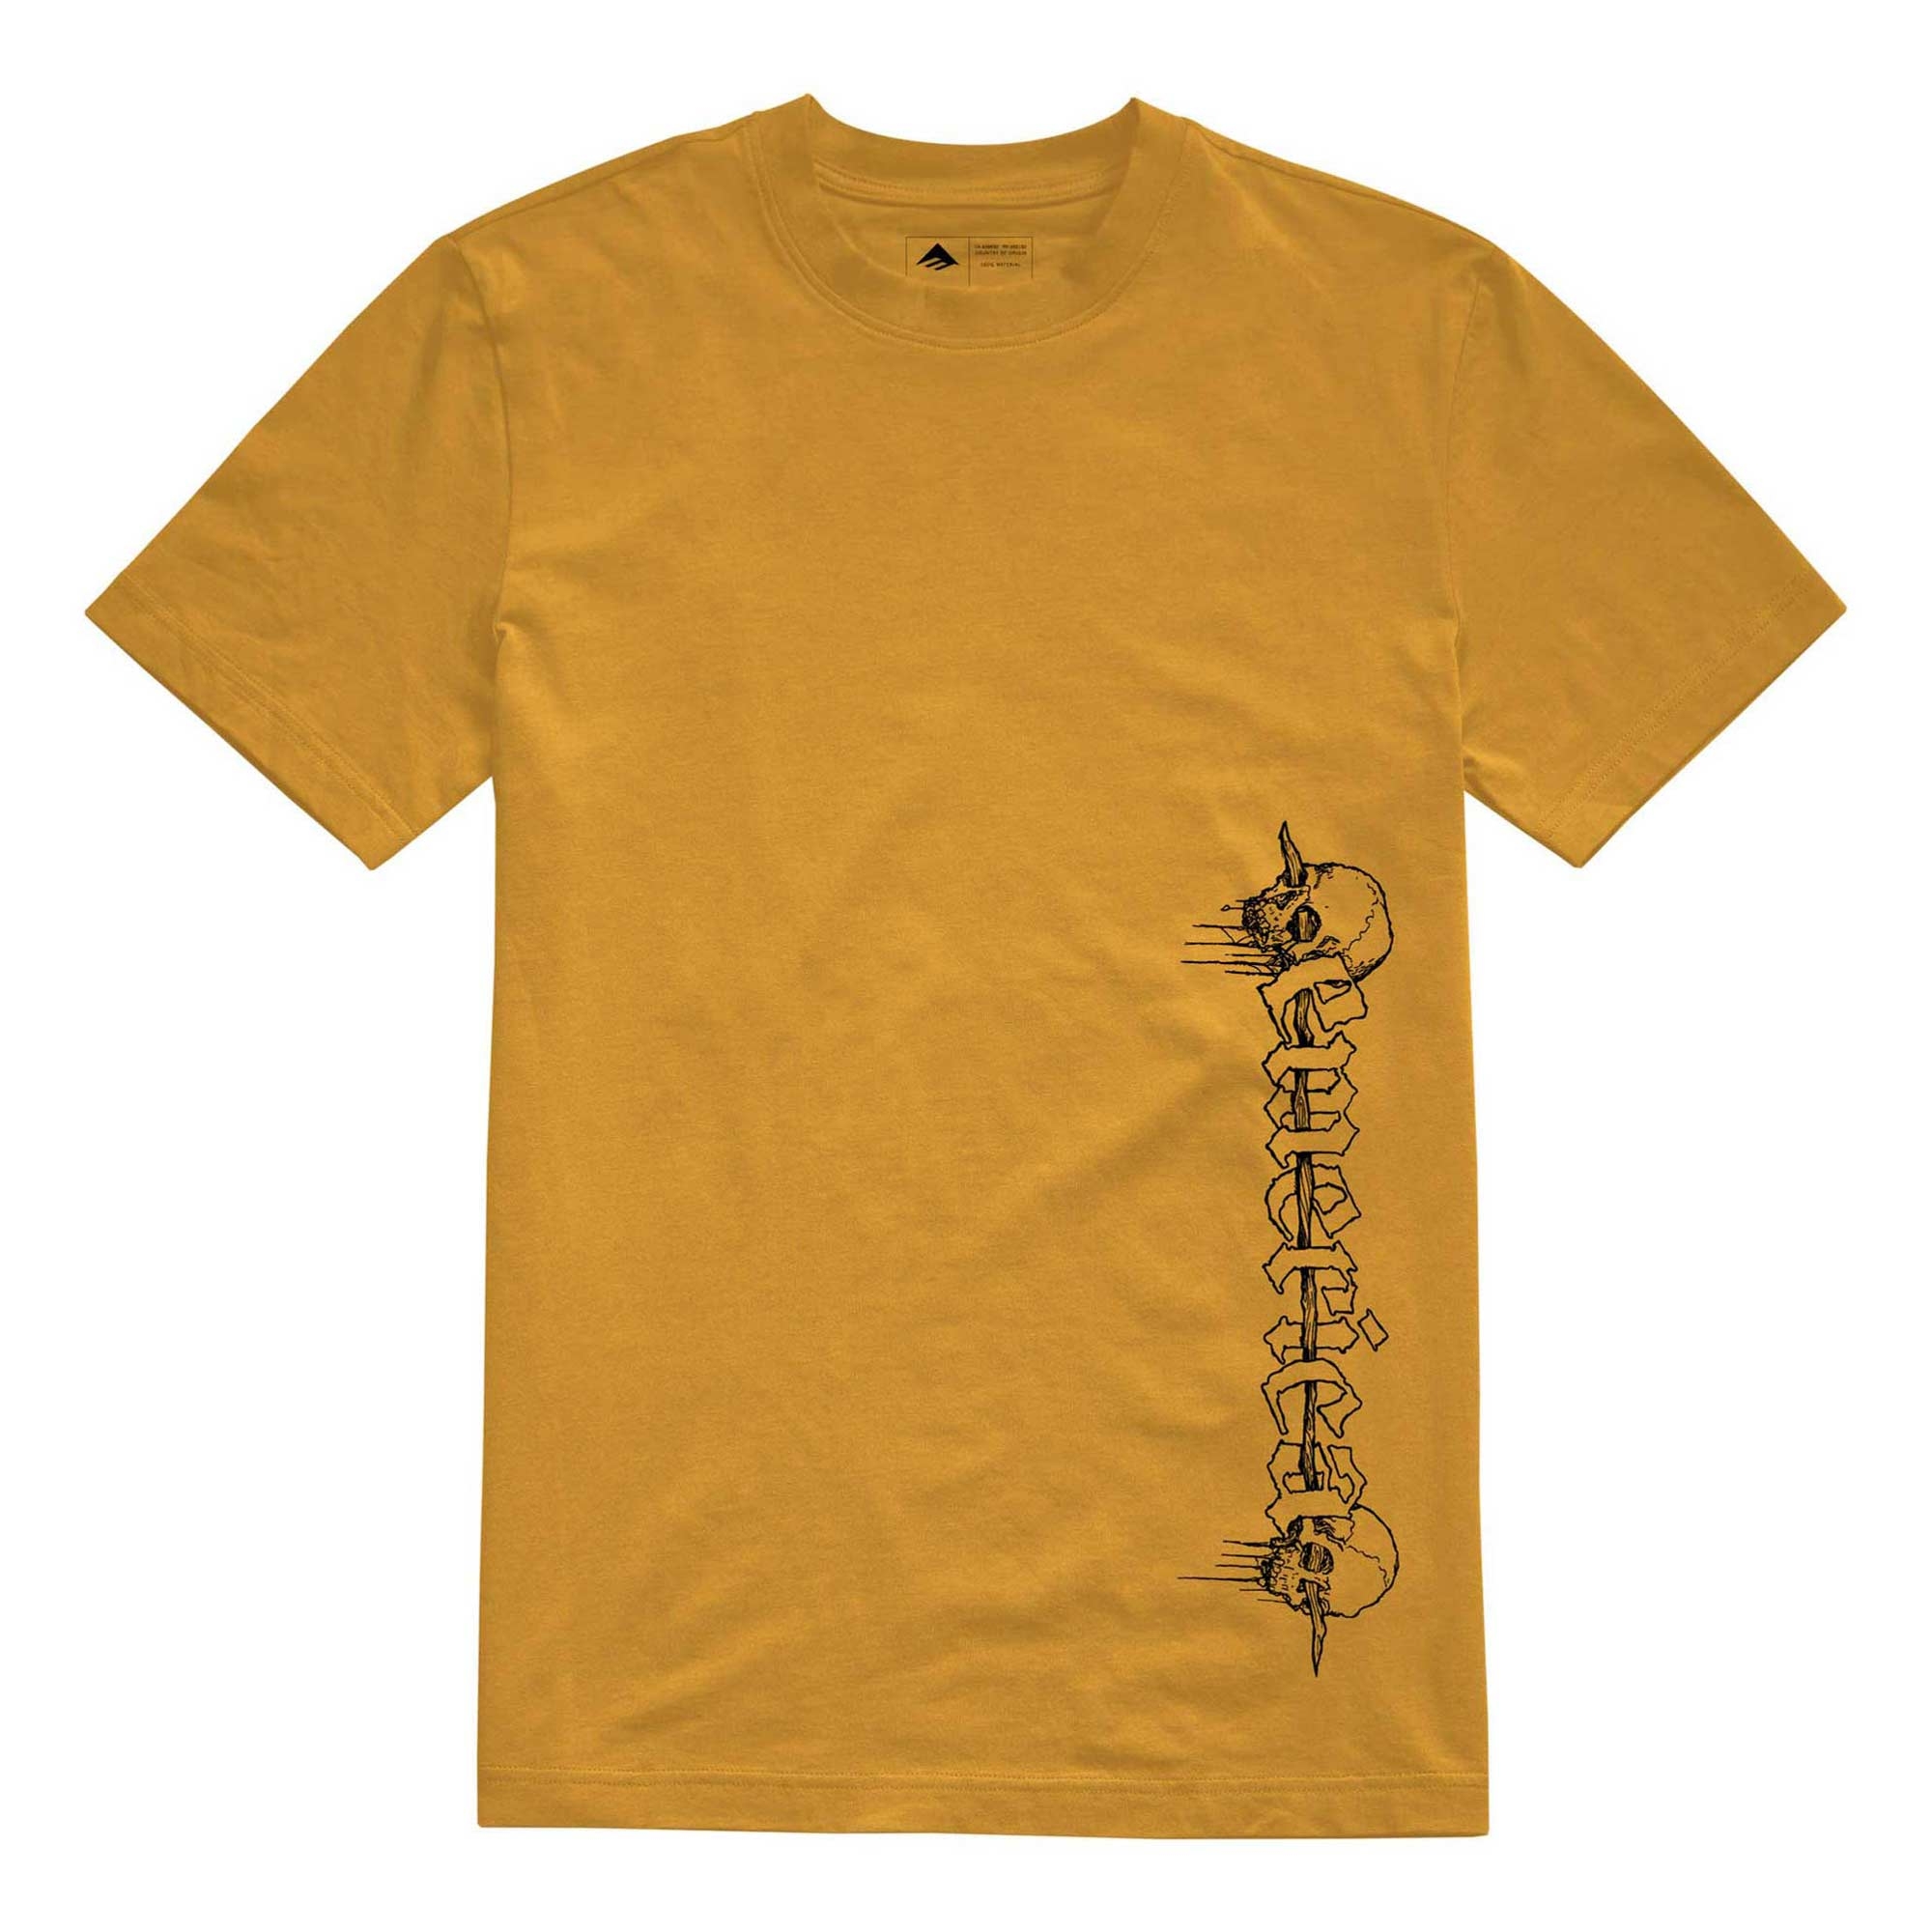 EMERICA T-Shirt SPIKED S/S gold